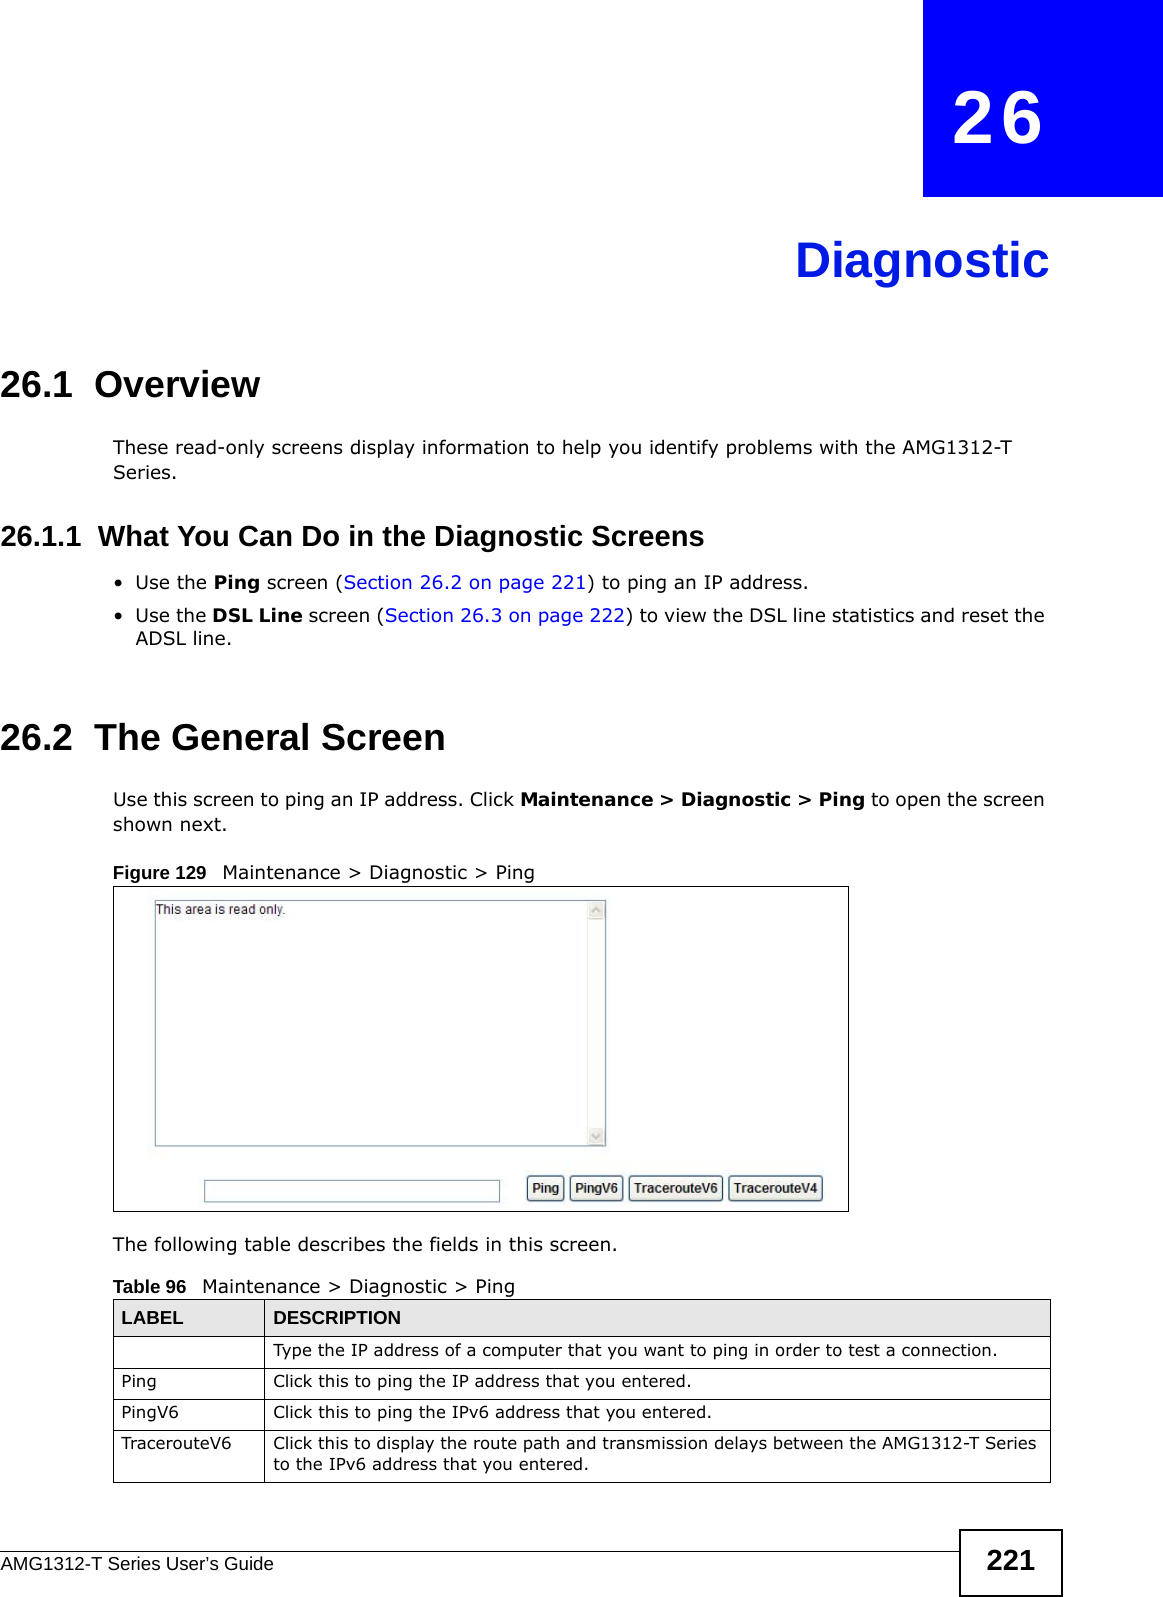 AMG1312-T Series User’s Guide 221CHAPTER   26Diagnostic26.1  OverviewThese read-only screens display information to help you identify problems with the AMG1312-T Series.26.1.1  What You Can Do in the Diagnostic Screens•Use the Ping screen (Section 26.2 on page 221) to ping an IP address.•Use the DSL Line screen (Section 26.3 on page 222) to view the DSL line statistics and reset the ADSL line.26.2  The General Screen Use this screen to ping an IP address. Click Maintenance &gt; Diagnostic &gt; Ping to open the screen shown next.Figure 129   Maintenance &gt; Diagnostic &gt; PingThe following table describes the fields in this screen. Table 96   Maintenance &gt; Diagnostic &gt; PingLABEL DESCRIPTIONType the IP address of a computer that you want to ping in order to test a connection.Ping Click this to ping the IP address that you entered.PingV6 Click this to ping the IPv6 address that you entered.TracerouteV6 Click this to display the route path and transmission delays between the AMG1312-T Series to the IPv6 address that you entered.